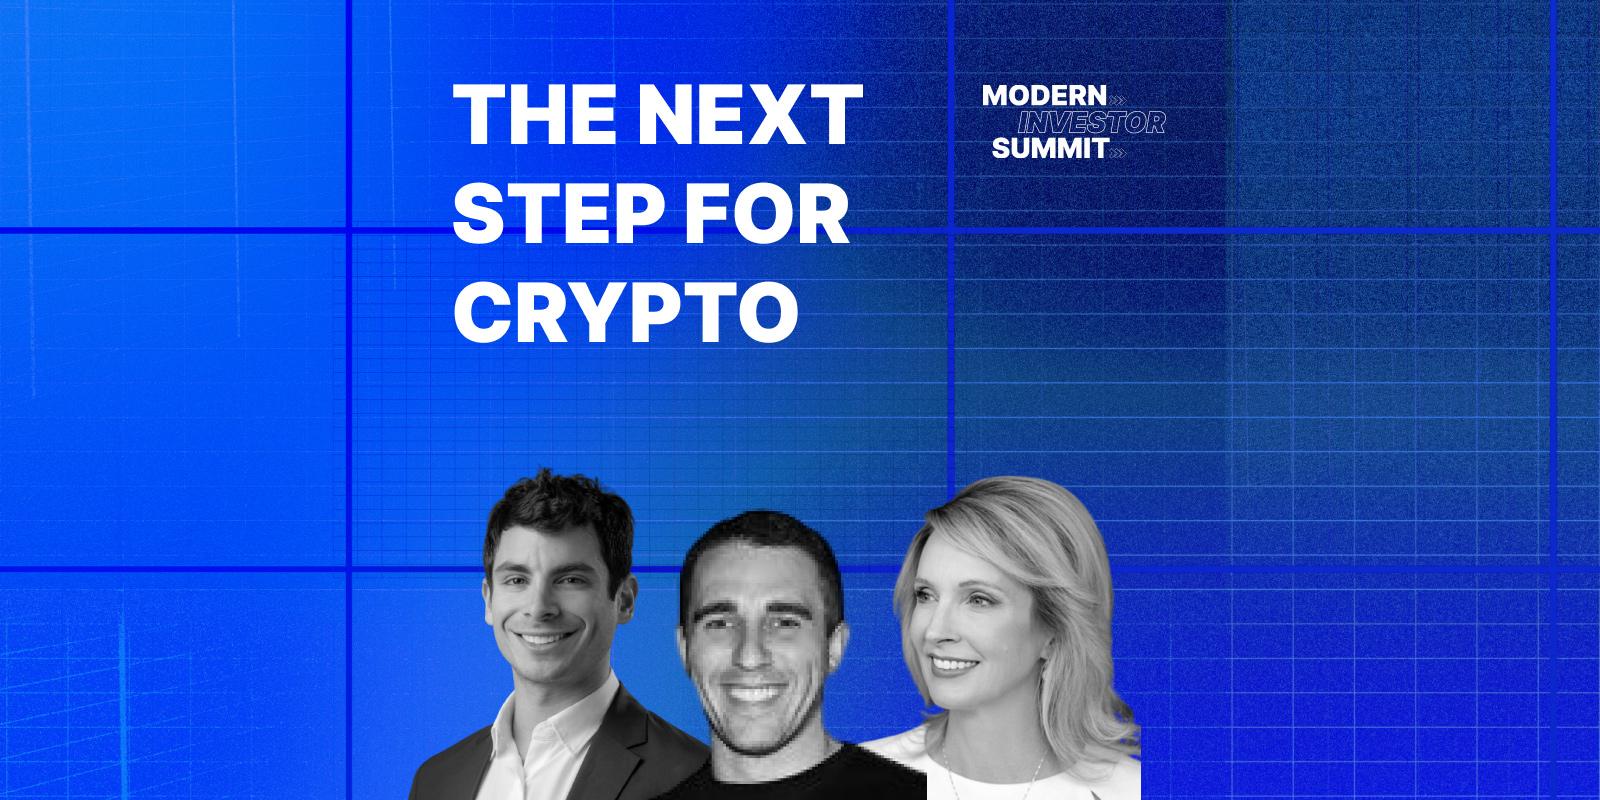 The Next Step For Crypto